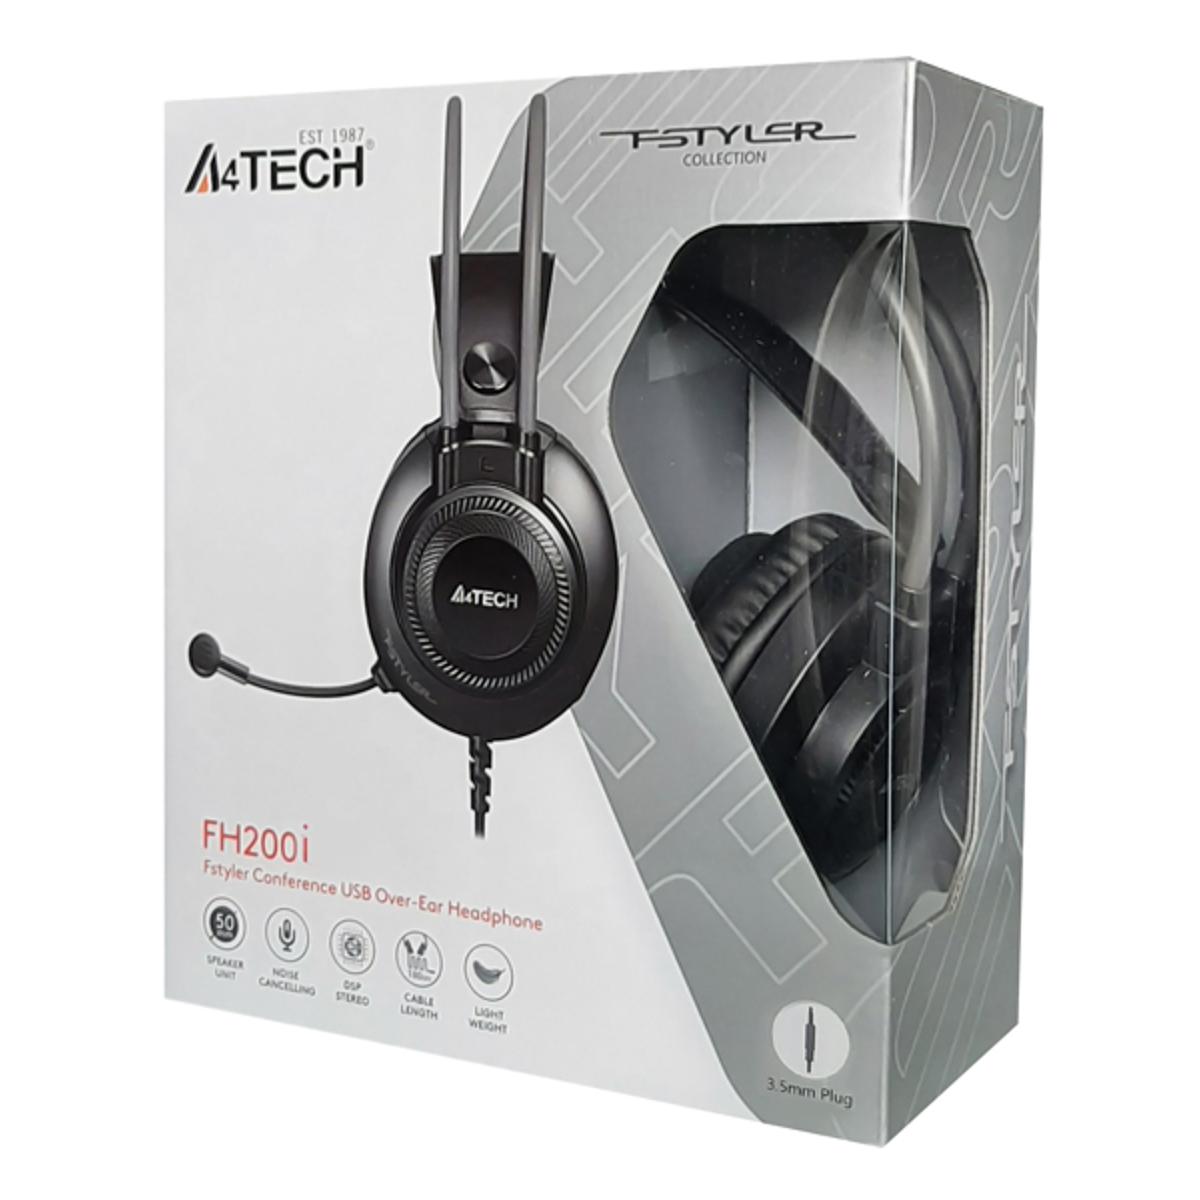 A4Tech FH200i FSTYLER Headphones- Over-Ear Headphone - 3.5 mm- Noise Cancelling - For Mobile/ PC/ Laptop/ PS4 - Grey/Blue